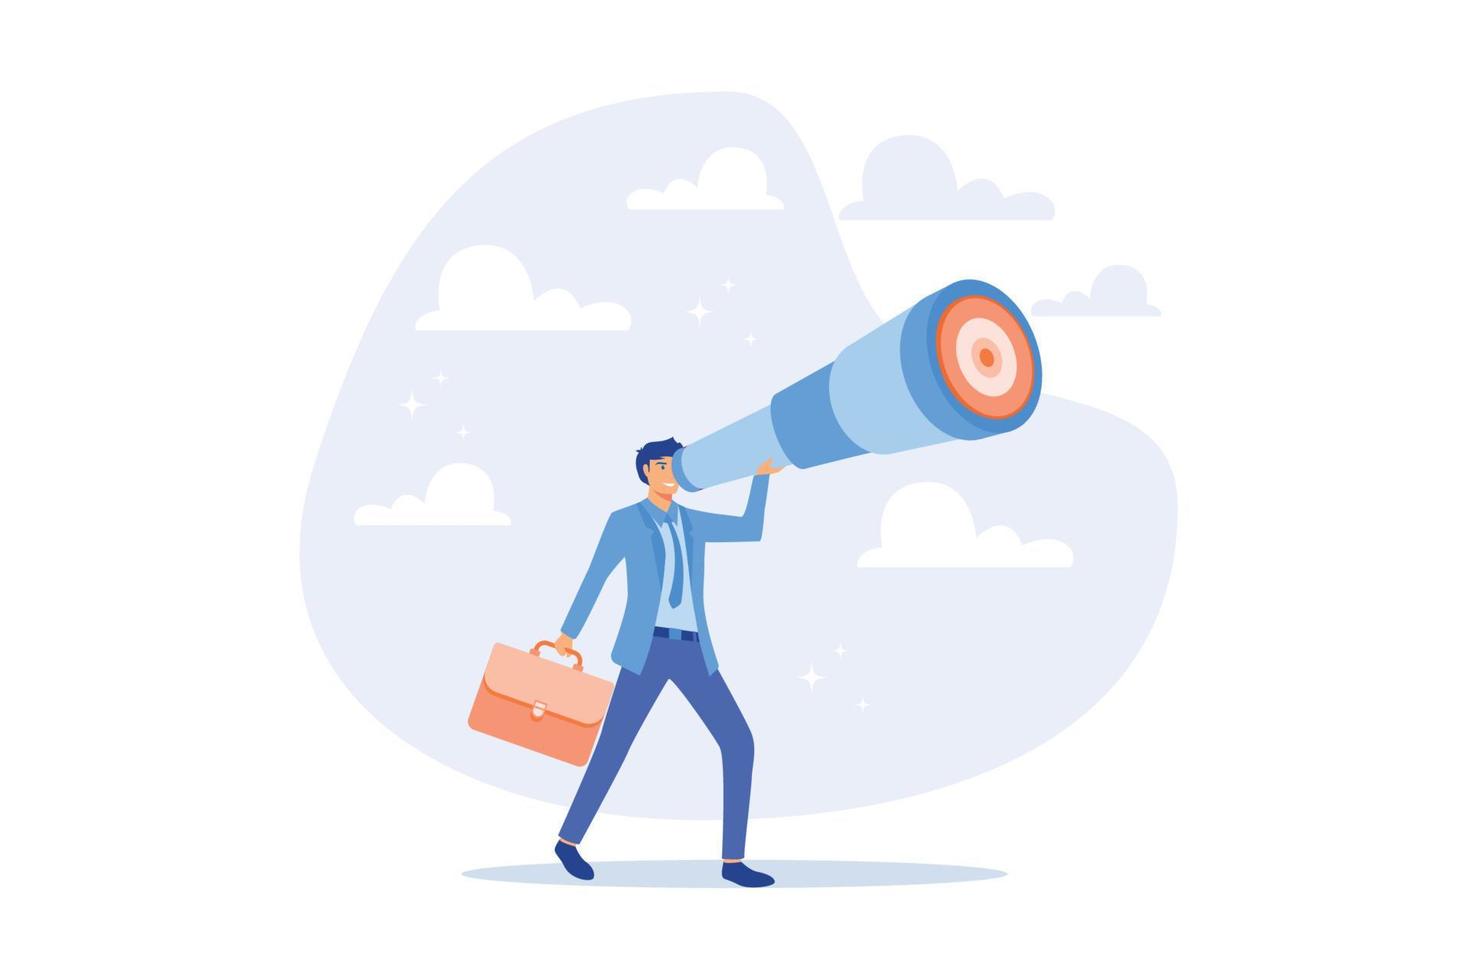 Search for business target or goal, mission or objective to achieve, discover purpose or find strategy to reach goal or destination concept, flat vector modern illustration